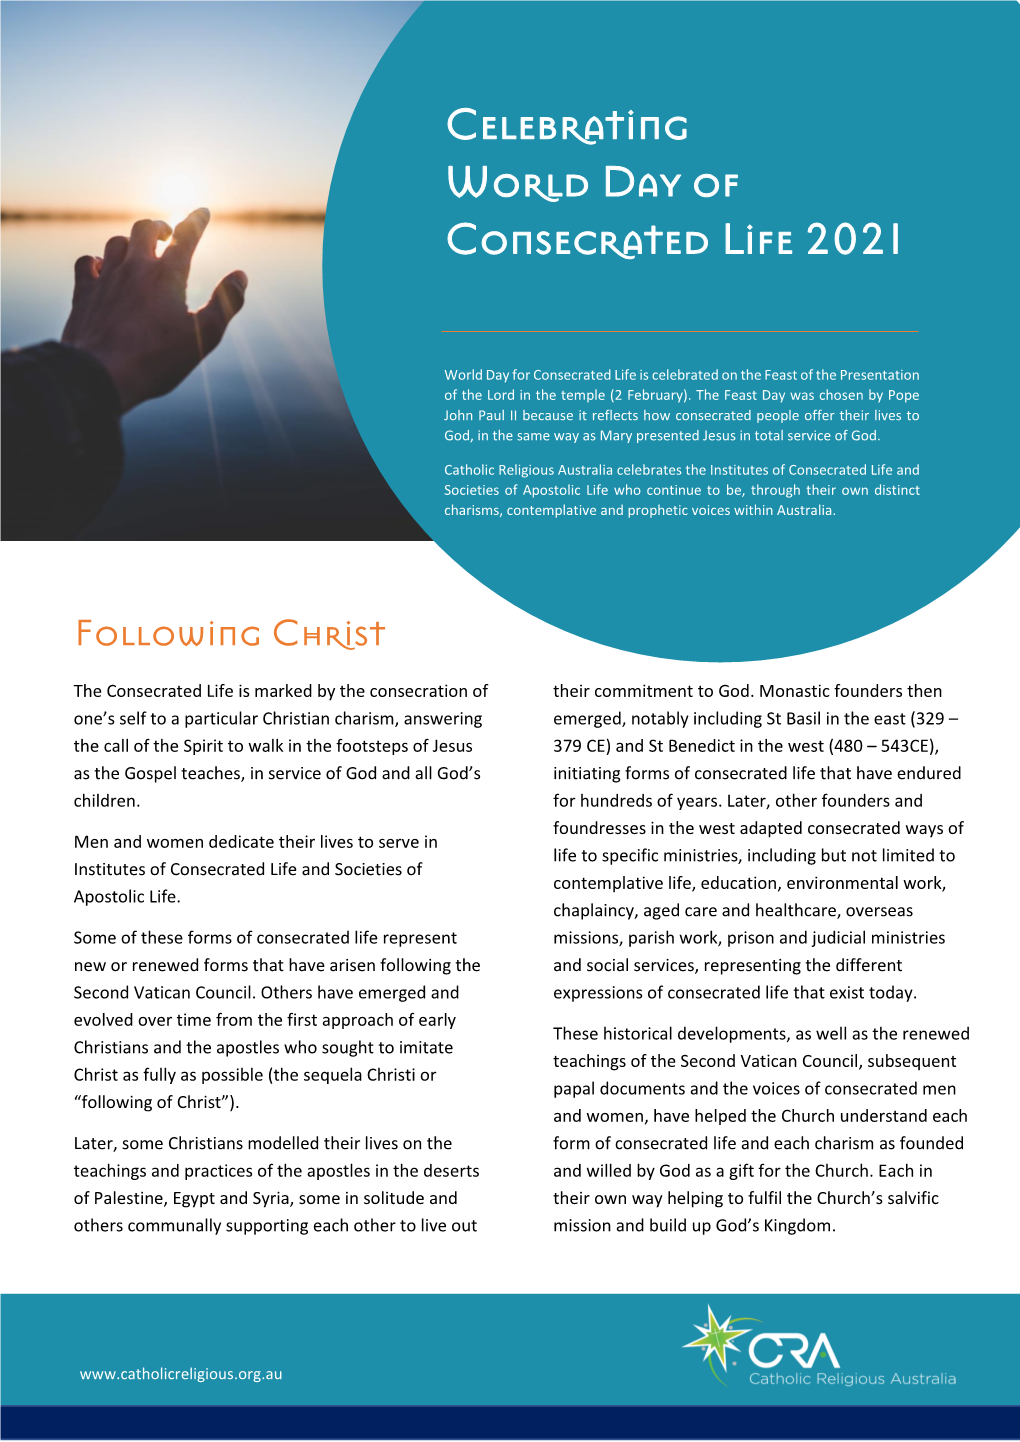 Celebrating World Day of Consecrated Life 2021